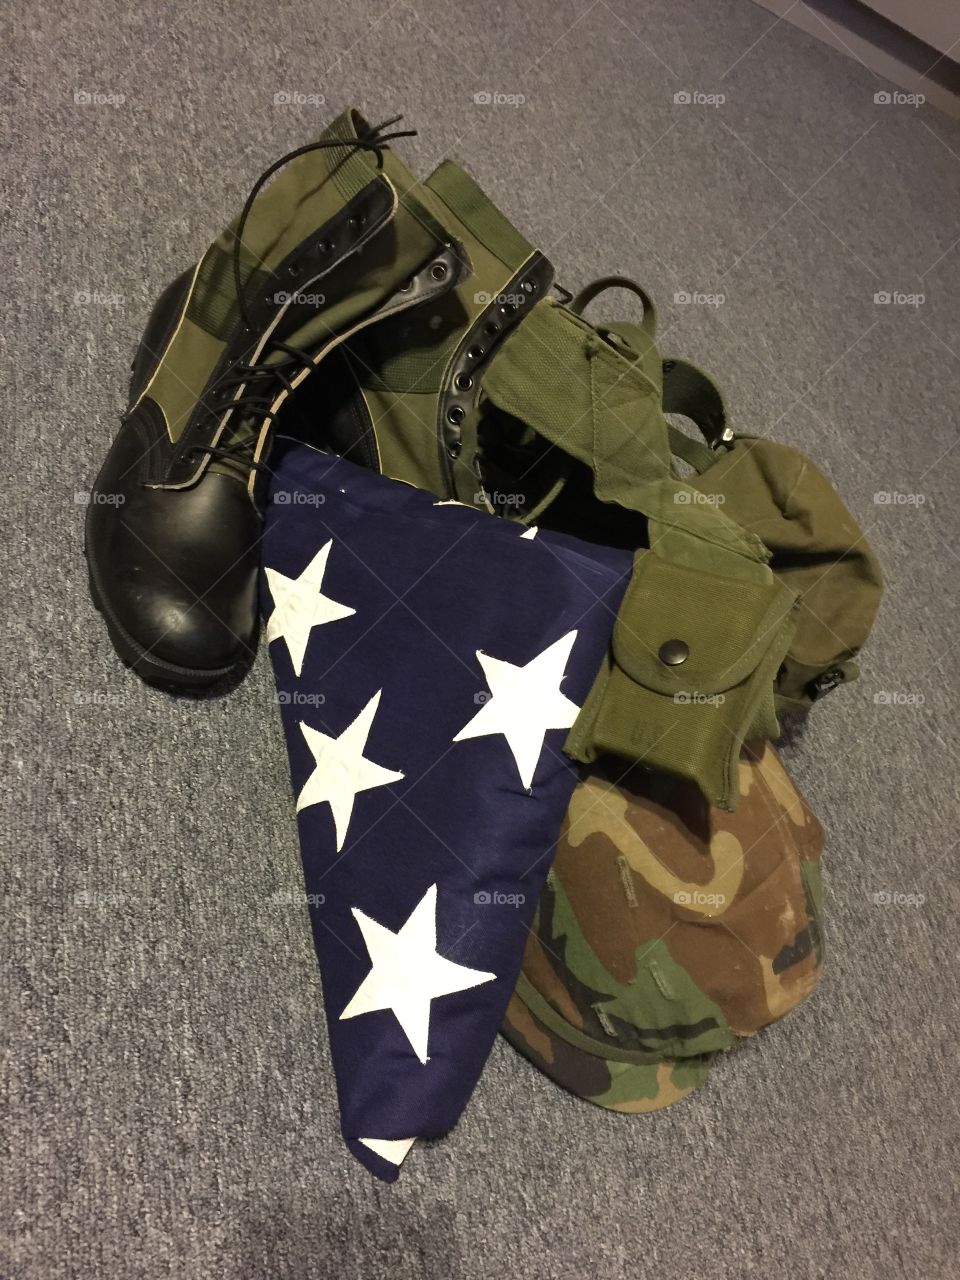 Closeup of military uniform and shoe with american flag